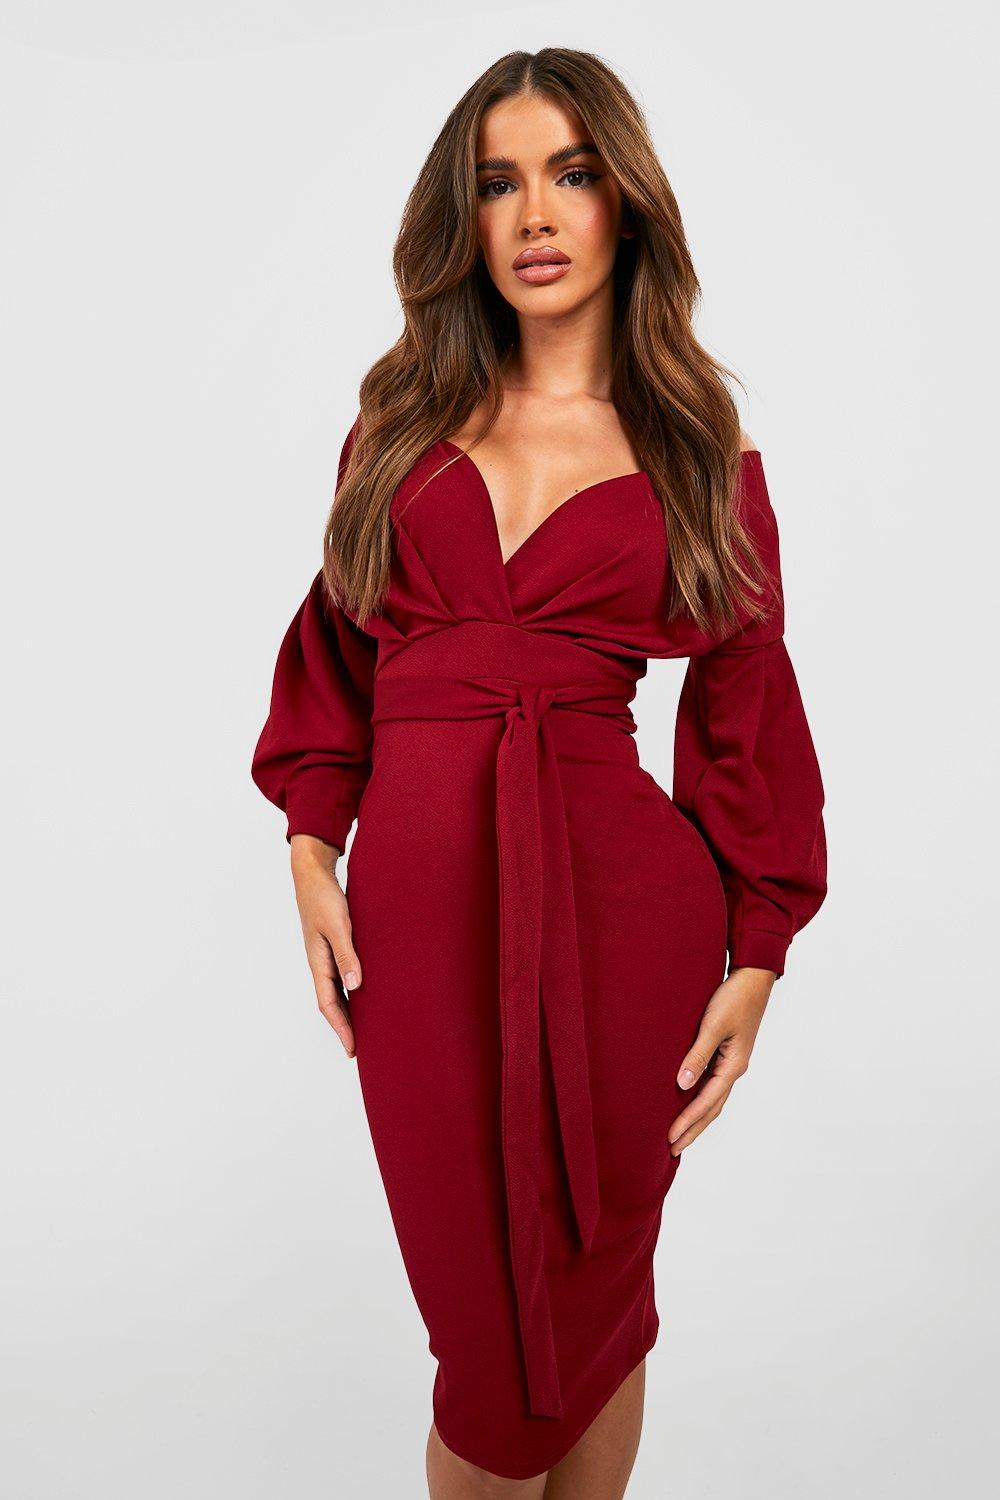 Red Dresses | Sexy Red ☀ Burgundy ...